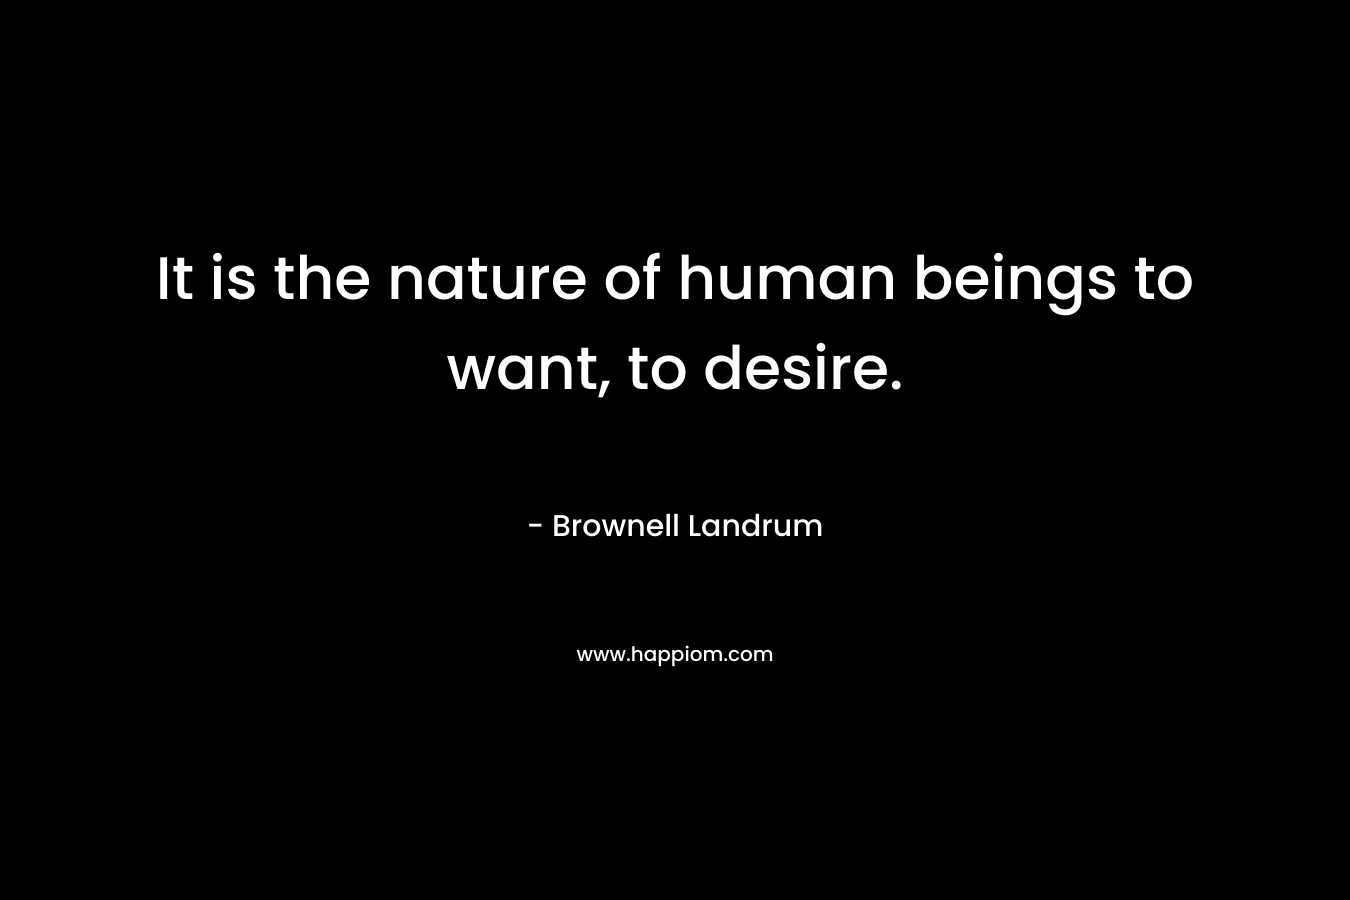 It is the nature of human beings to want, to desire.